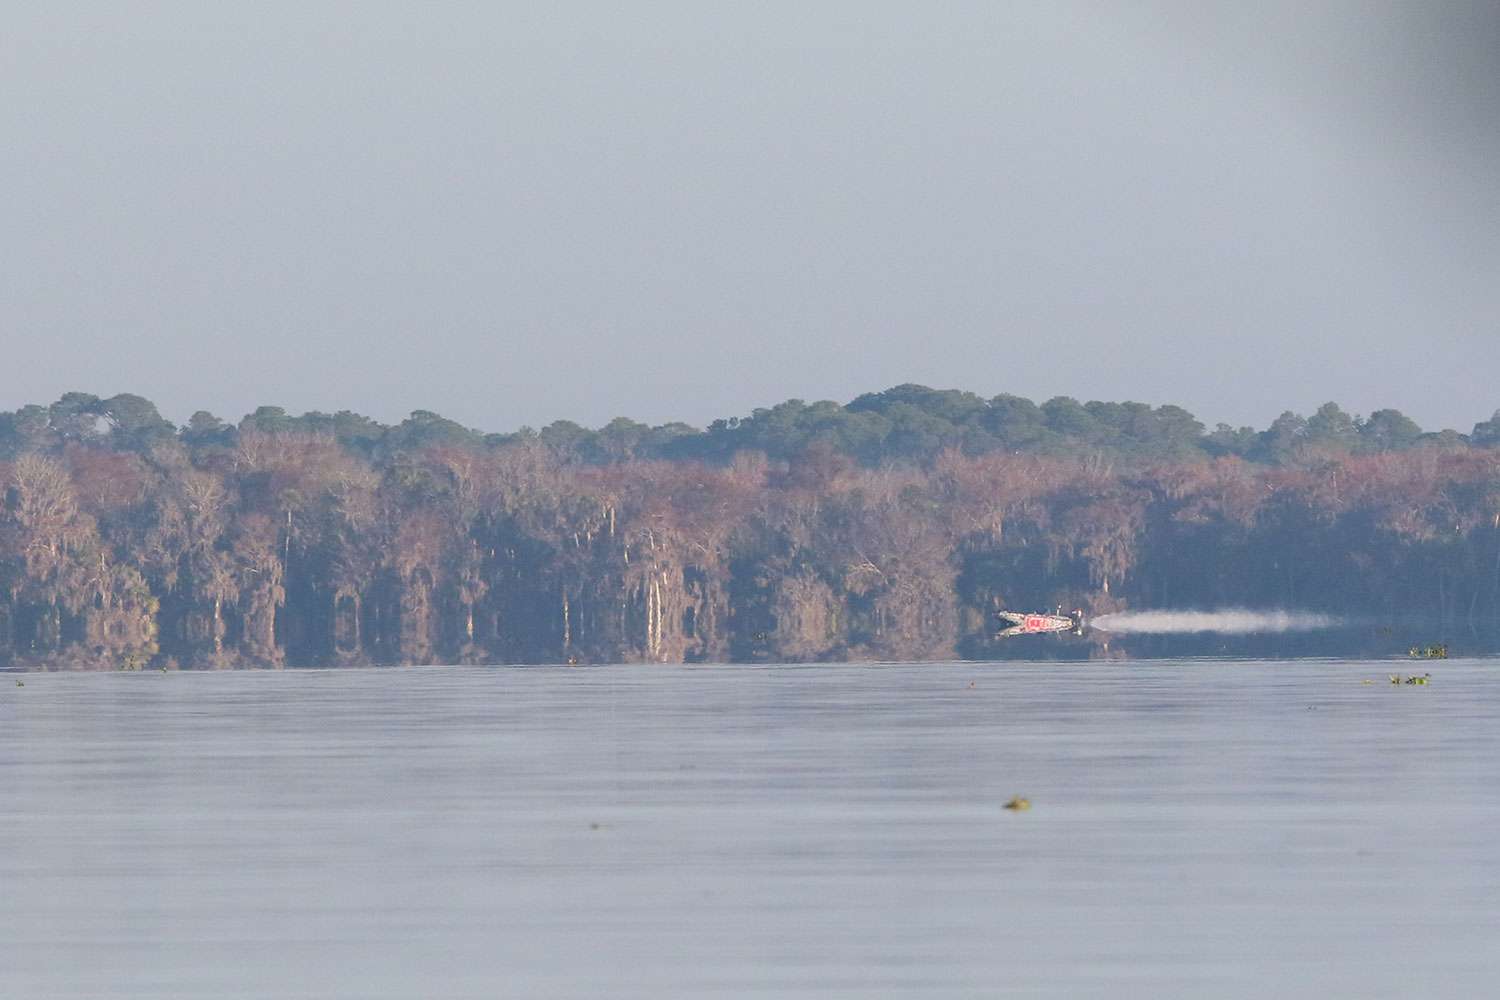 Check out some early action from Lake George at the 2019 Power-Pole Bassmaster Elite at St. Johns River.